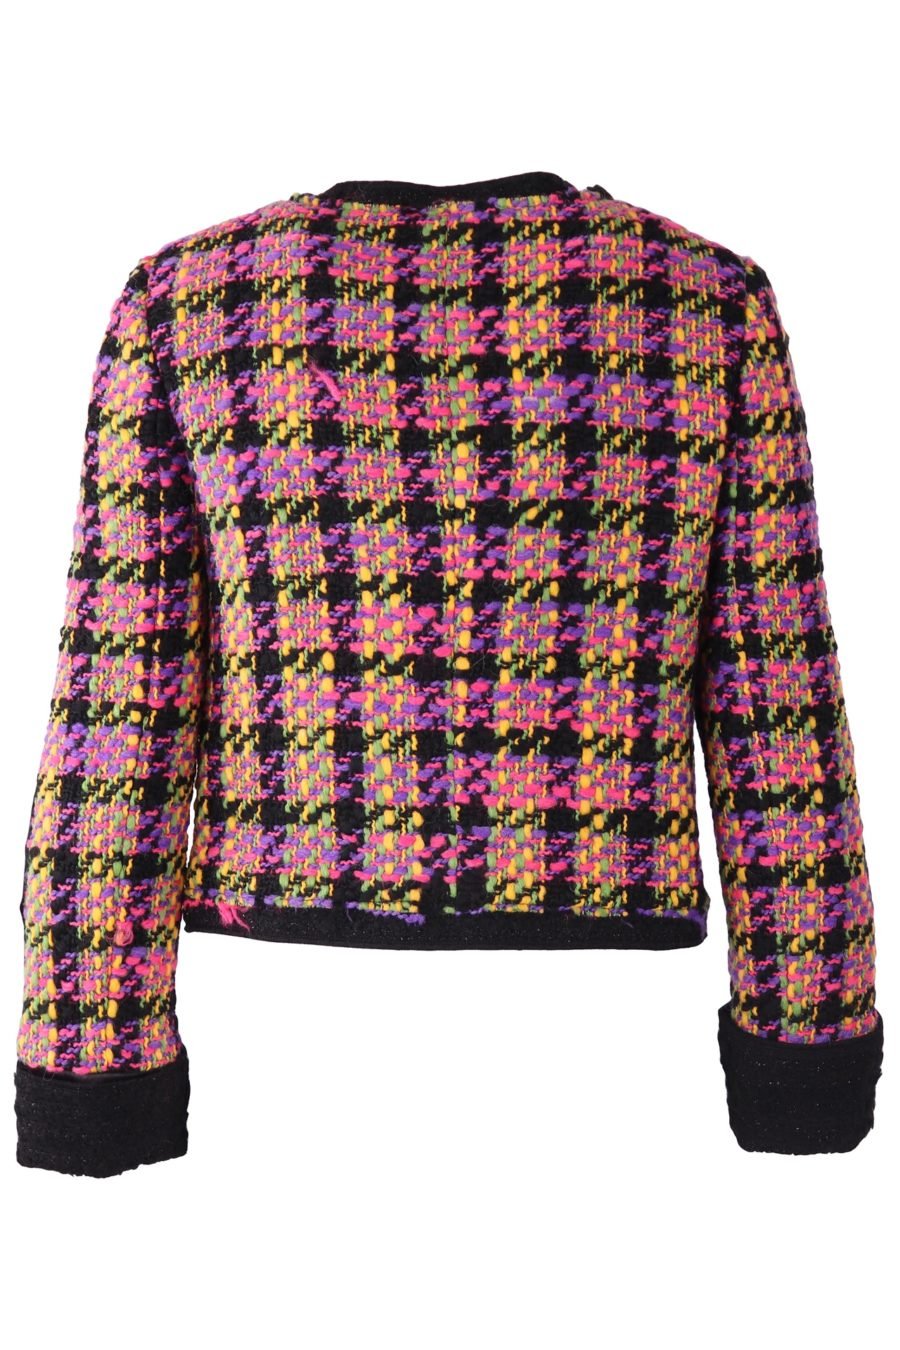 Versace Jeans Couture Short tweed jacket with gold buttons - ddb09b7a38cad0bcc09c184b5051f1281d49ec44